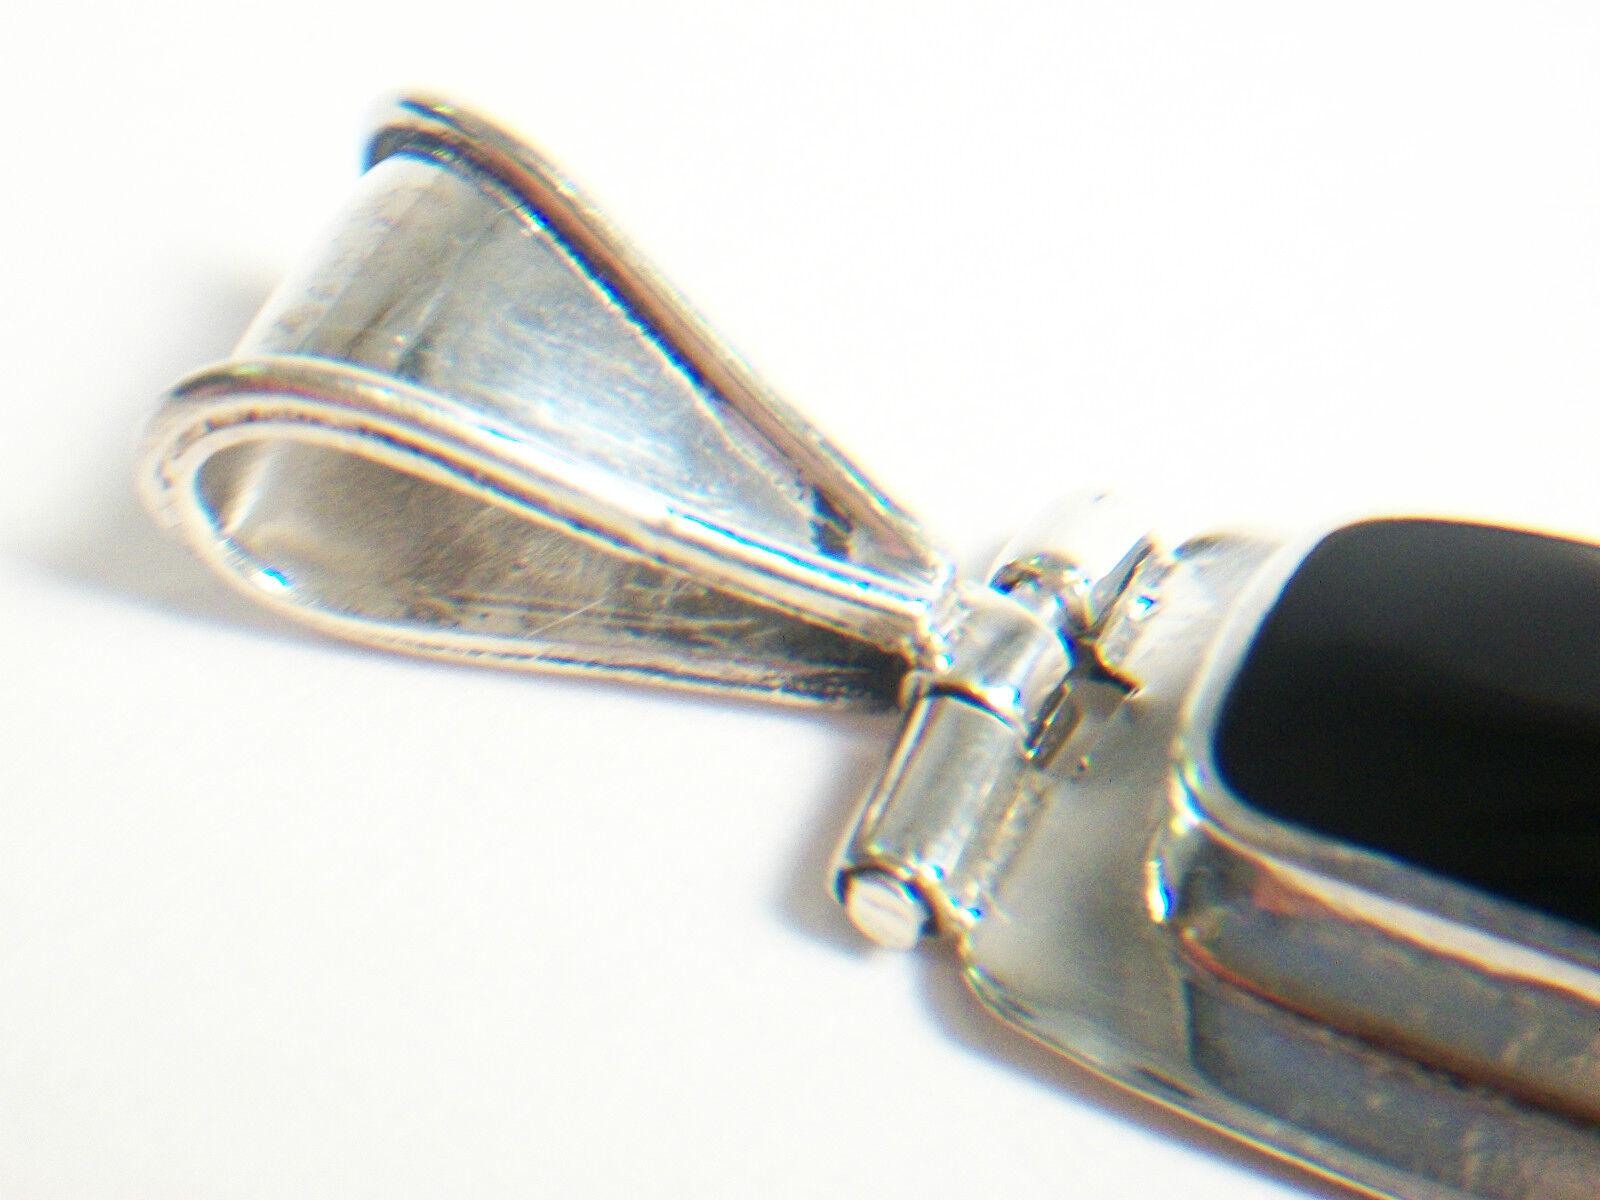 Vintage Modernist Sterling Silver & Black Onyx Pendant - Mexico - 20th Century For Sale 4